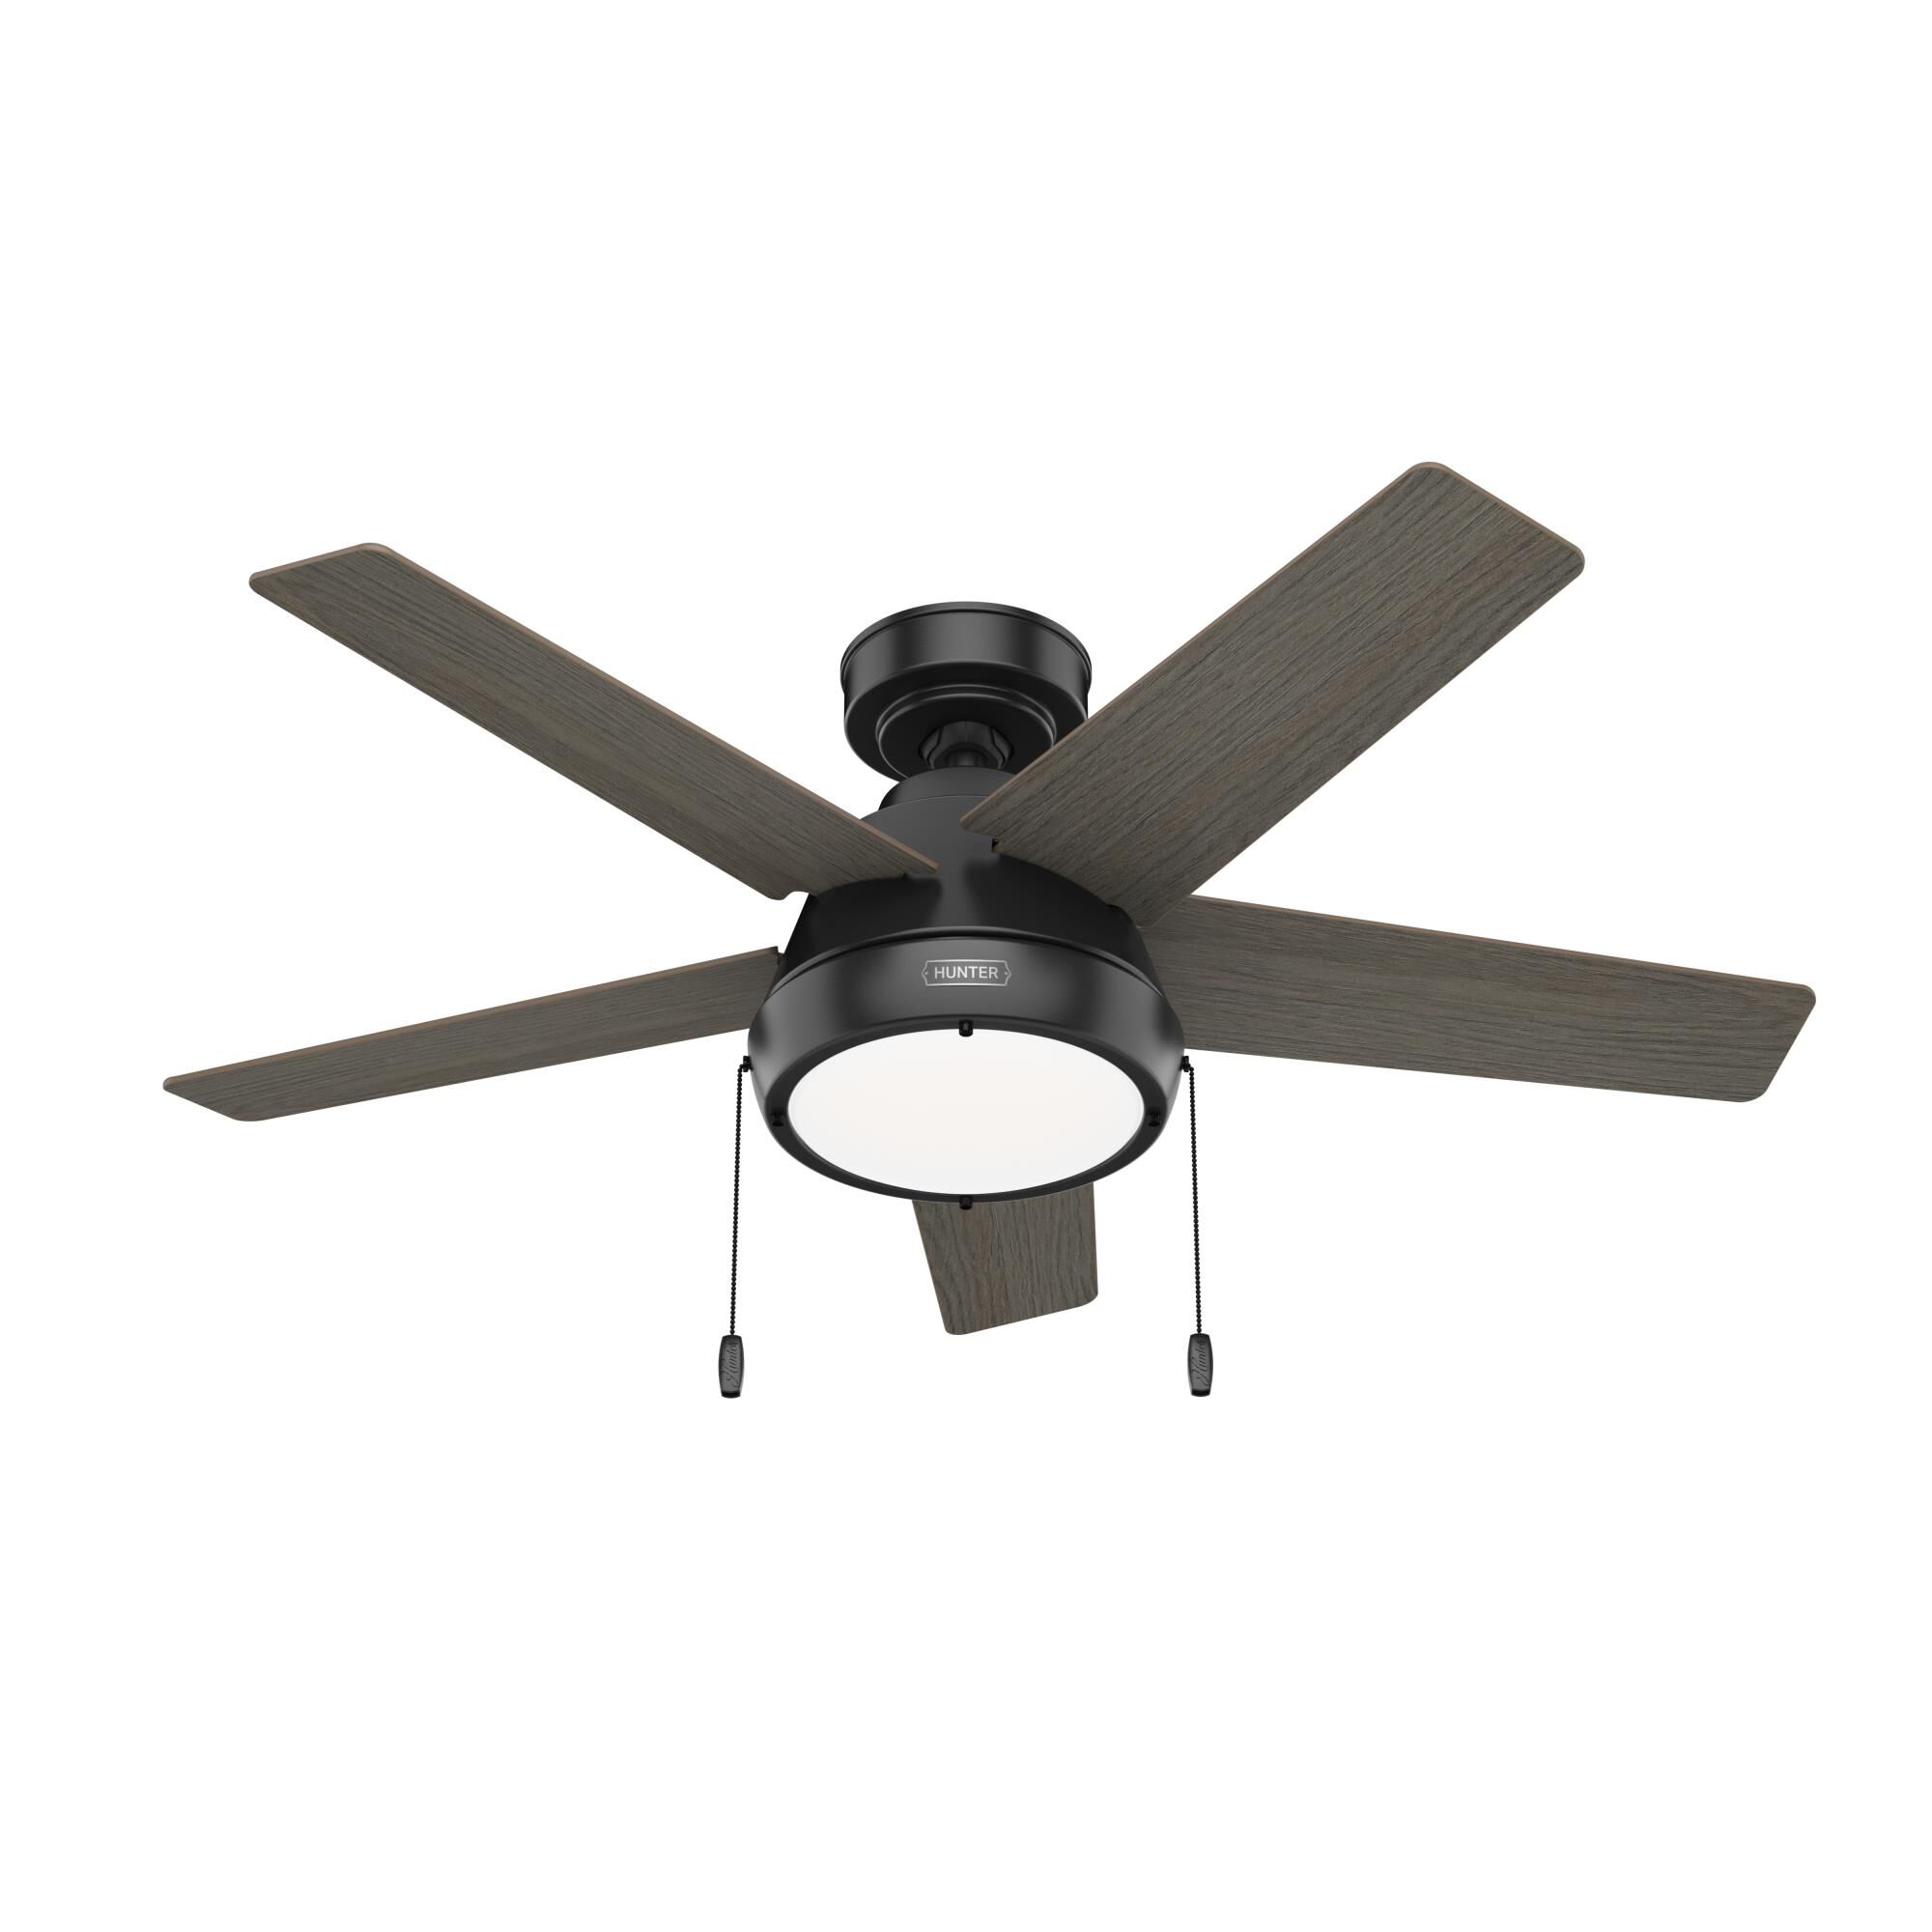 Photos - Fan Hunter  Burroughs 44 Inch Ceiling  with Light Kit Burroughs - 51385 